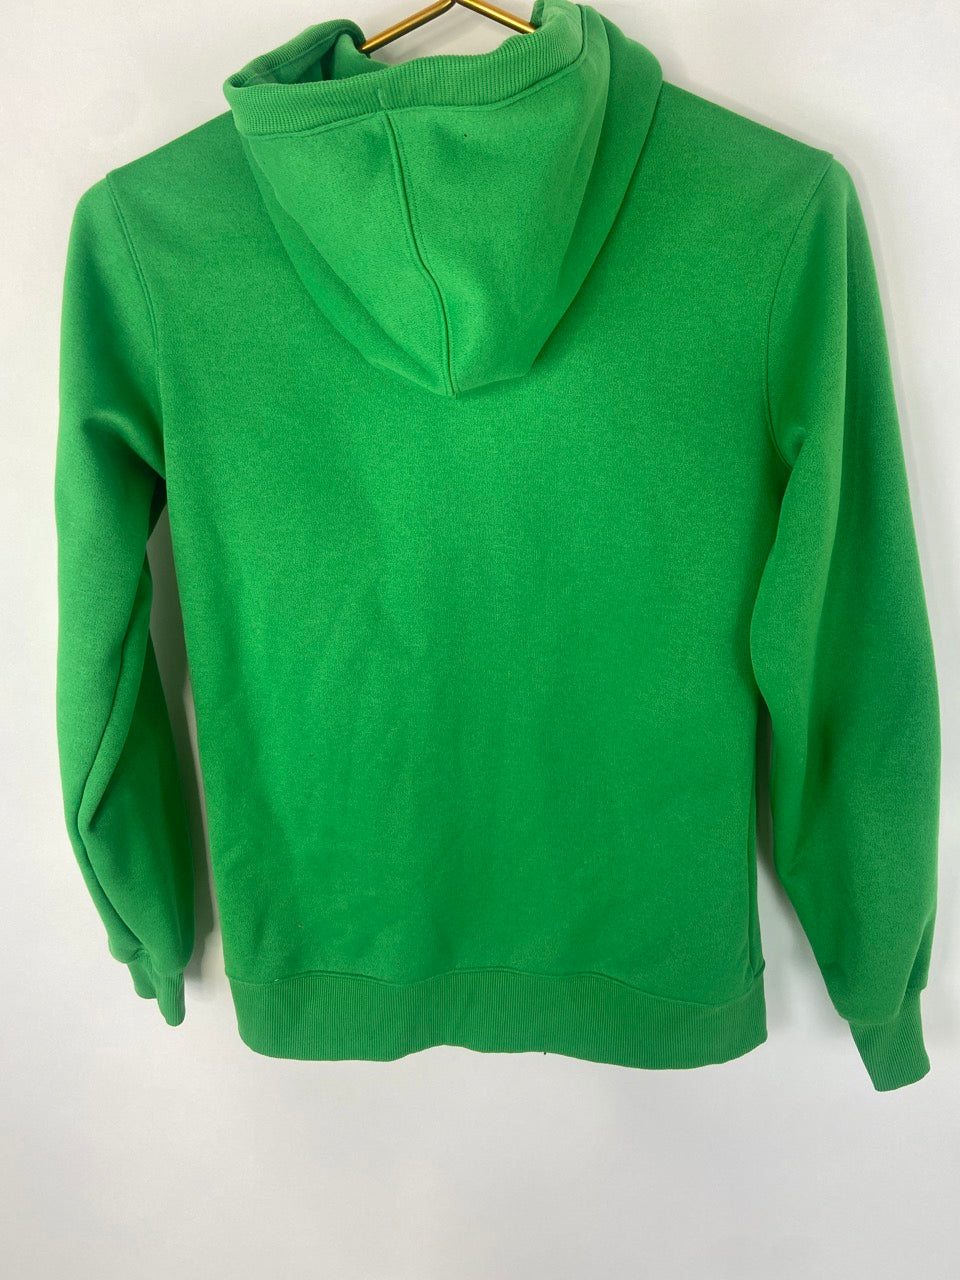 Green Hooded Under Armour Zip Up- XS